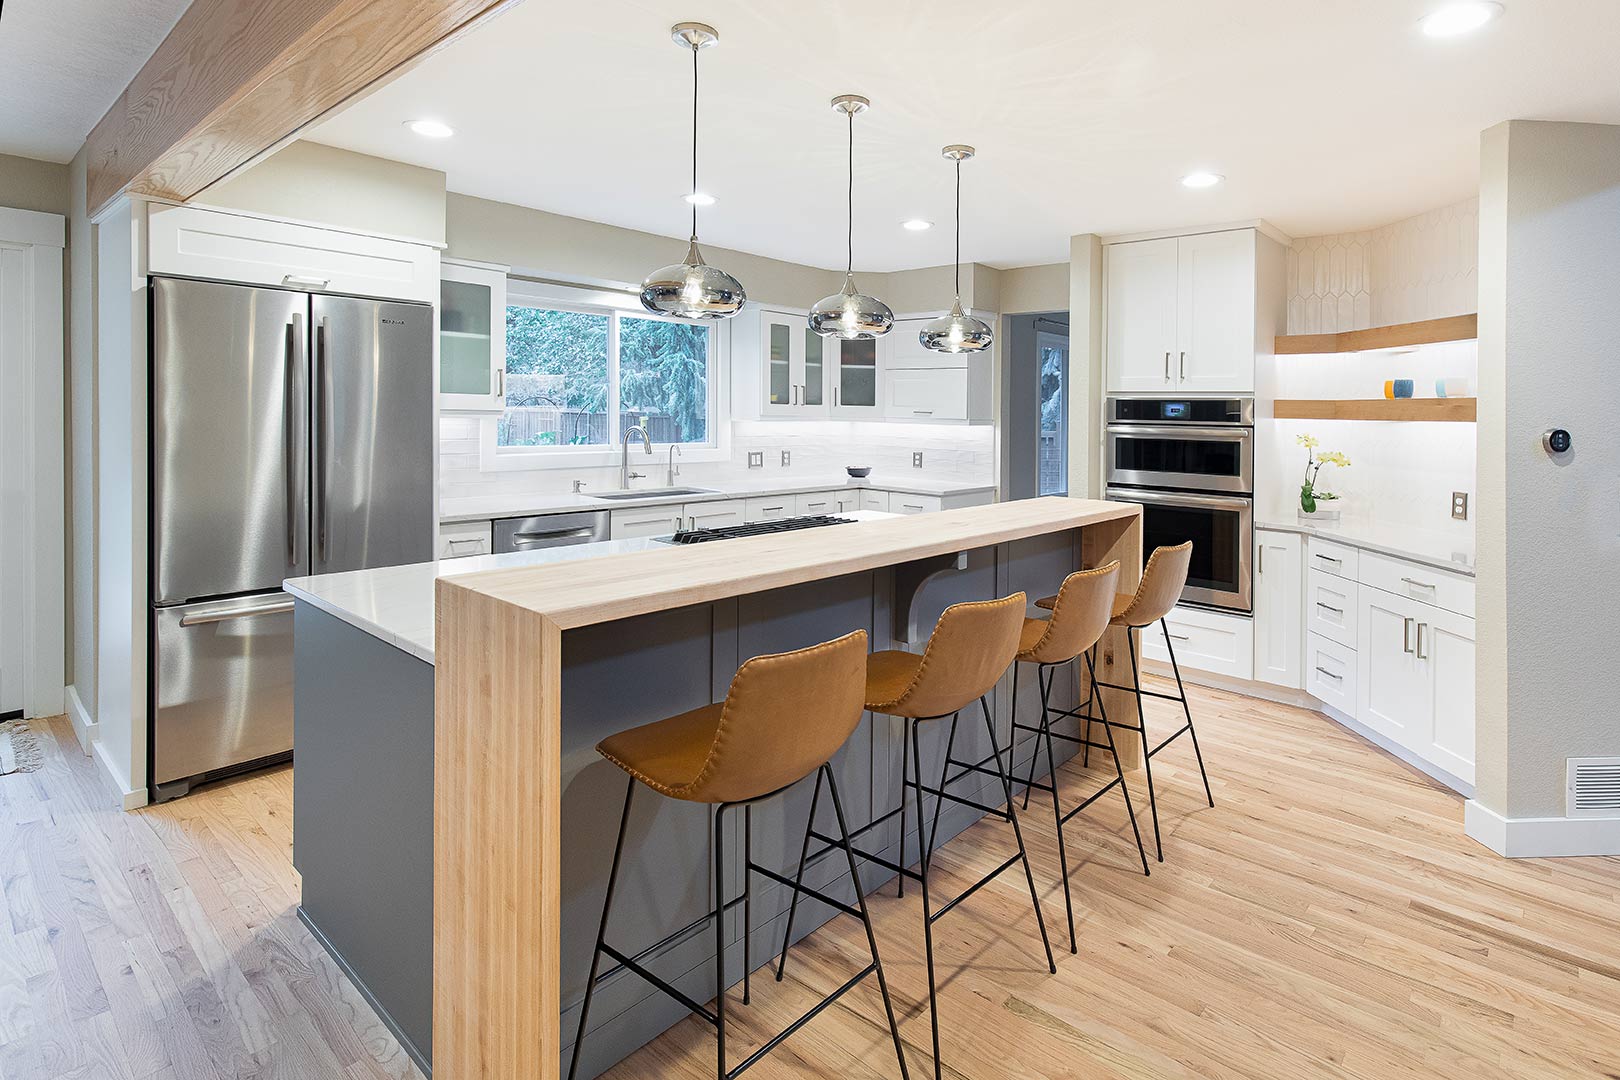 A transitional modern kitchen renovation showing a dual heigh island with bar seating in Fort Collins Colorado.